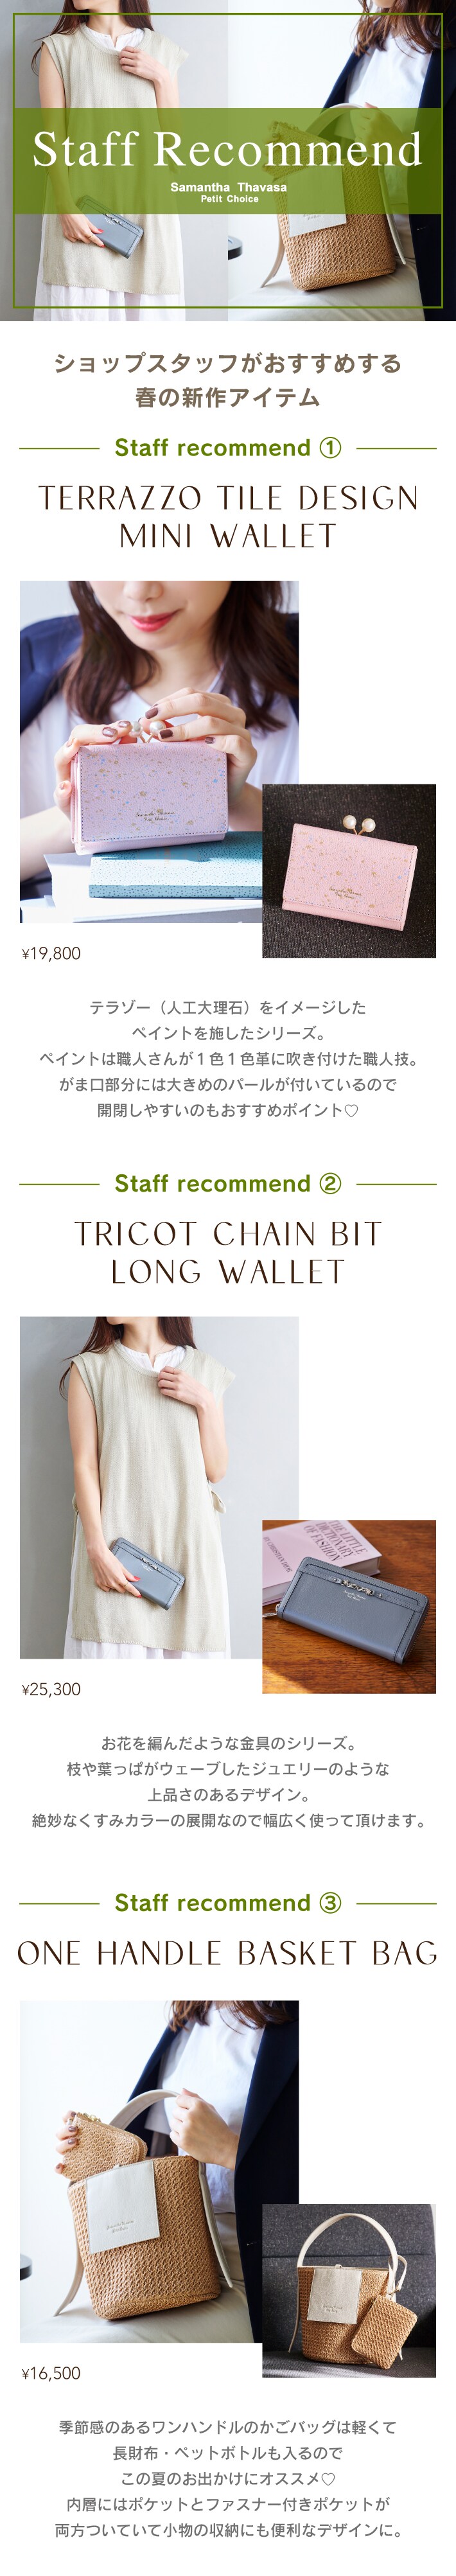 【PC】Staff Recommend